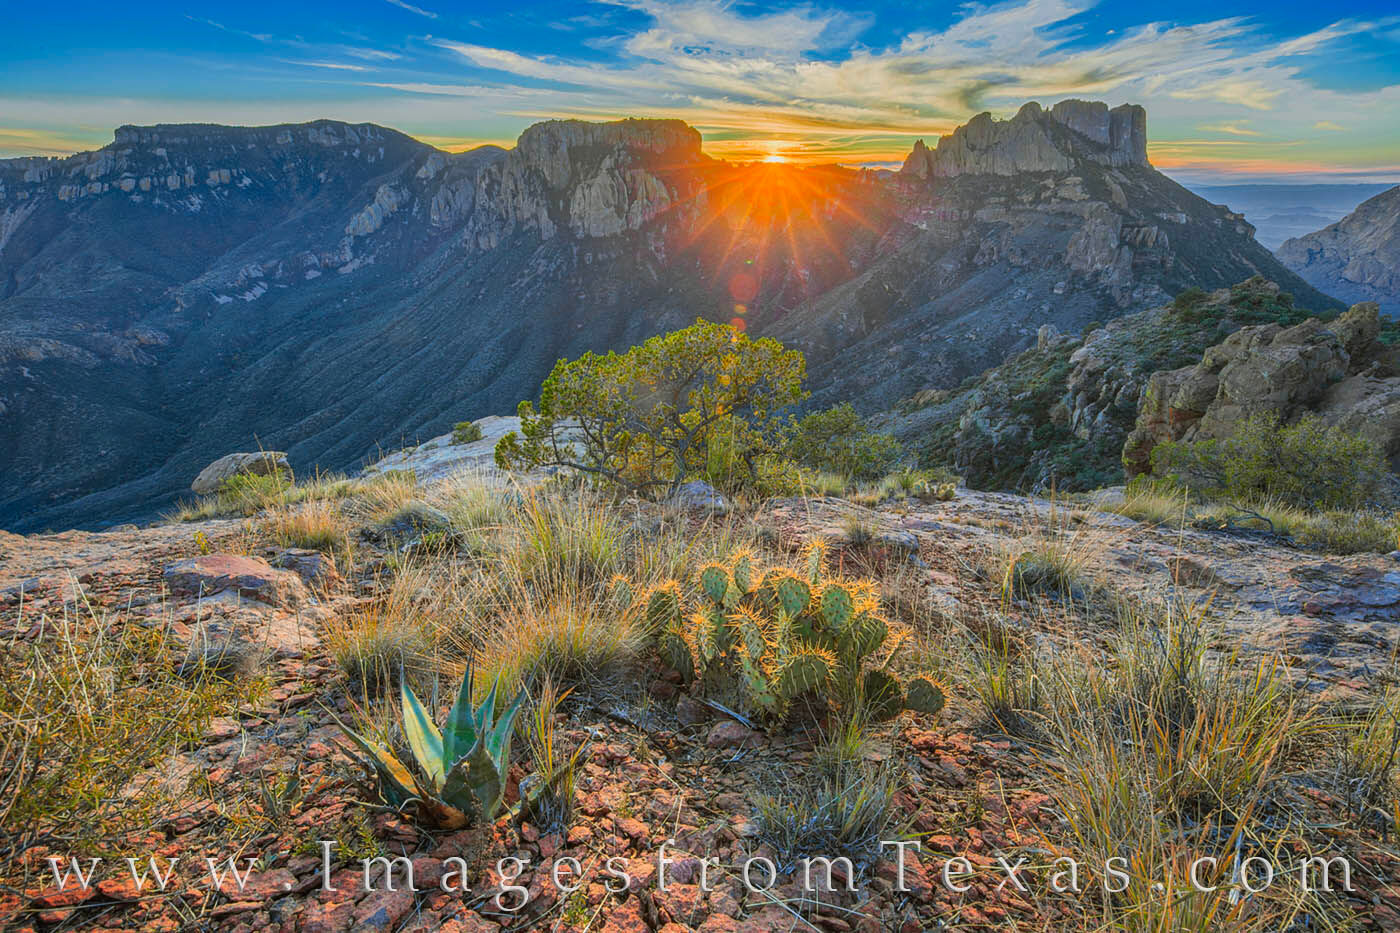 Prickly Pear and Yucca made a nice foreground in this sunset photograph taken high up on the Lost Mine Trail. The iconic Casa...